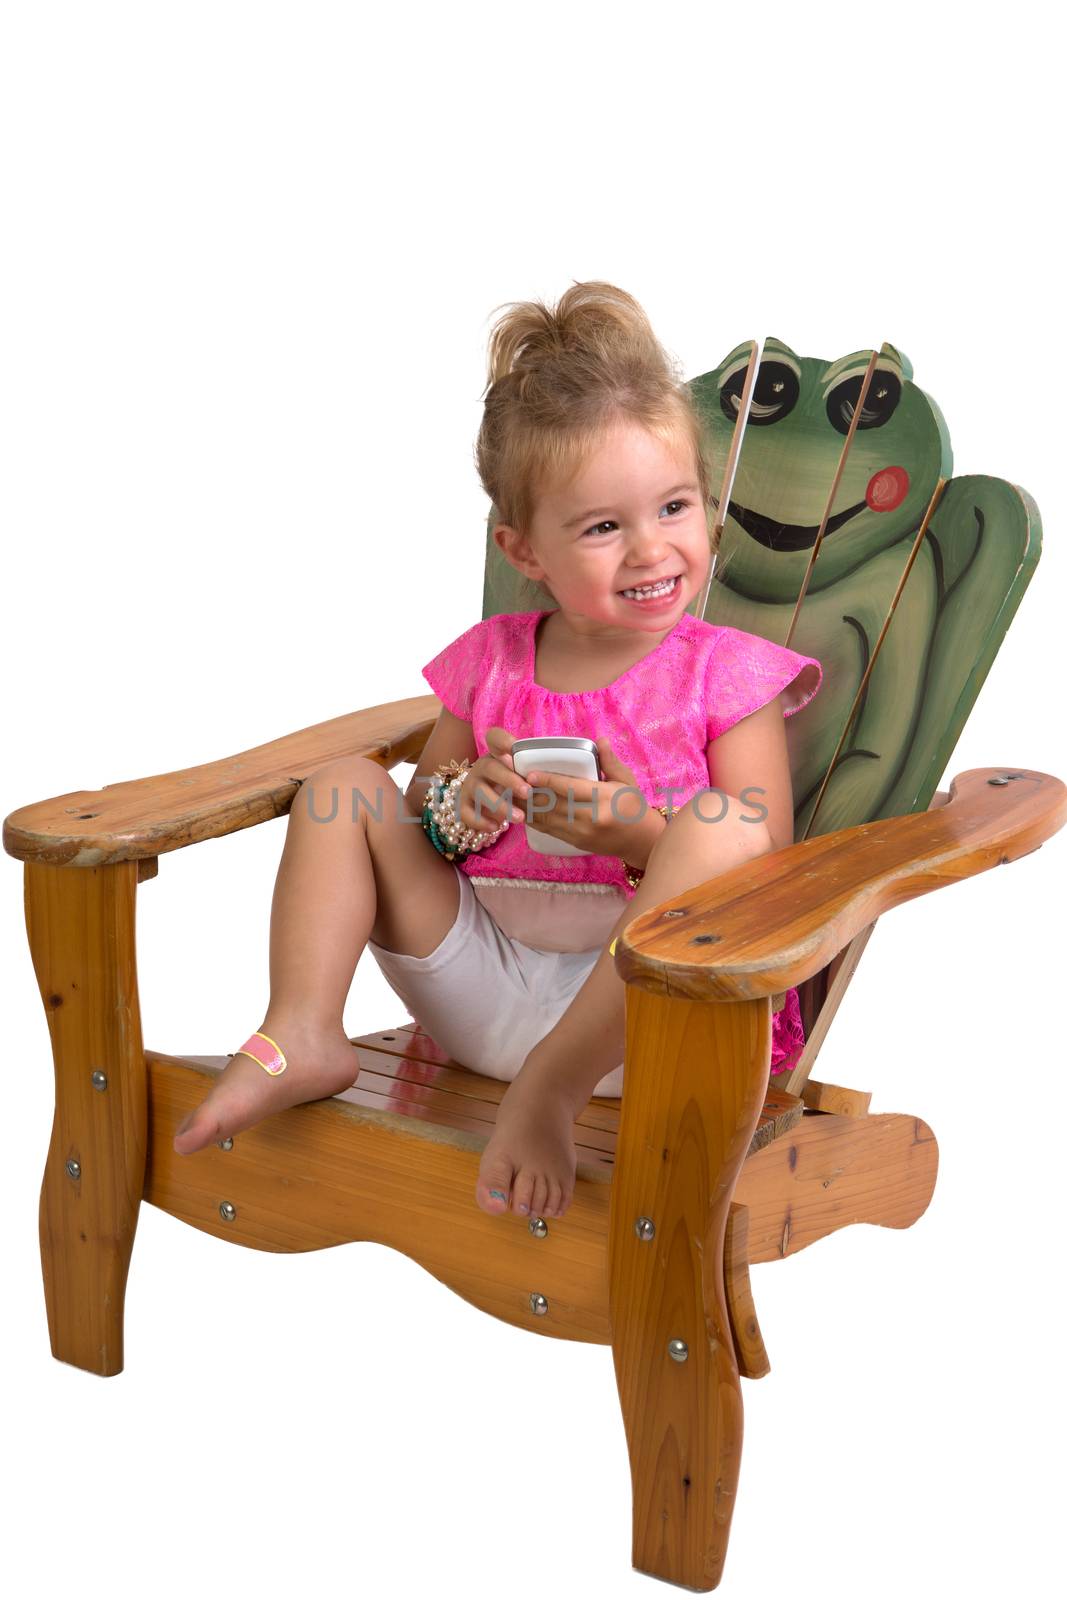 Pretty Young Toddler Showing her happey feelings on a beach chair while holding a cell phone, perhaps she received good news